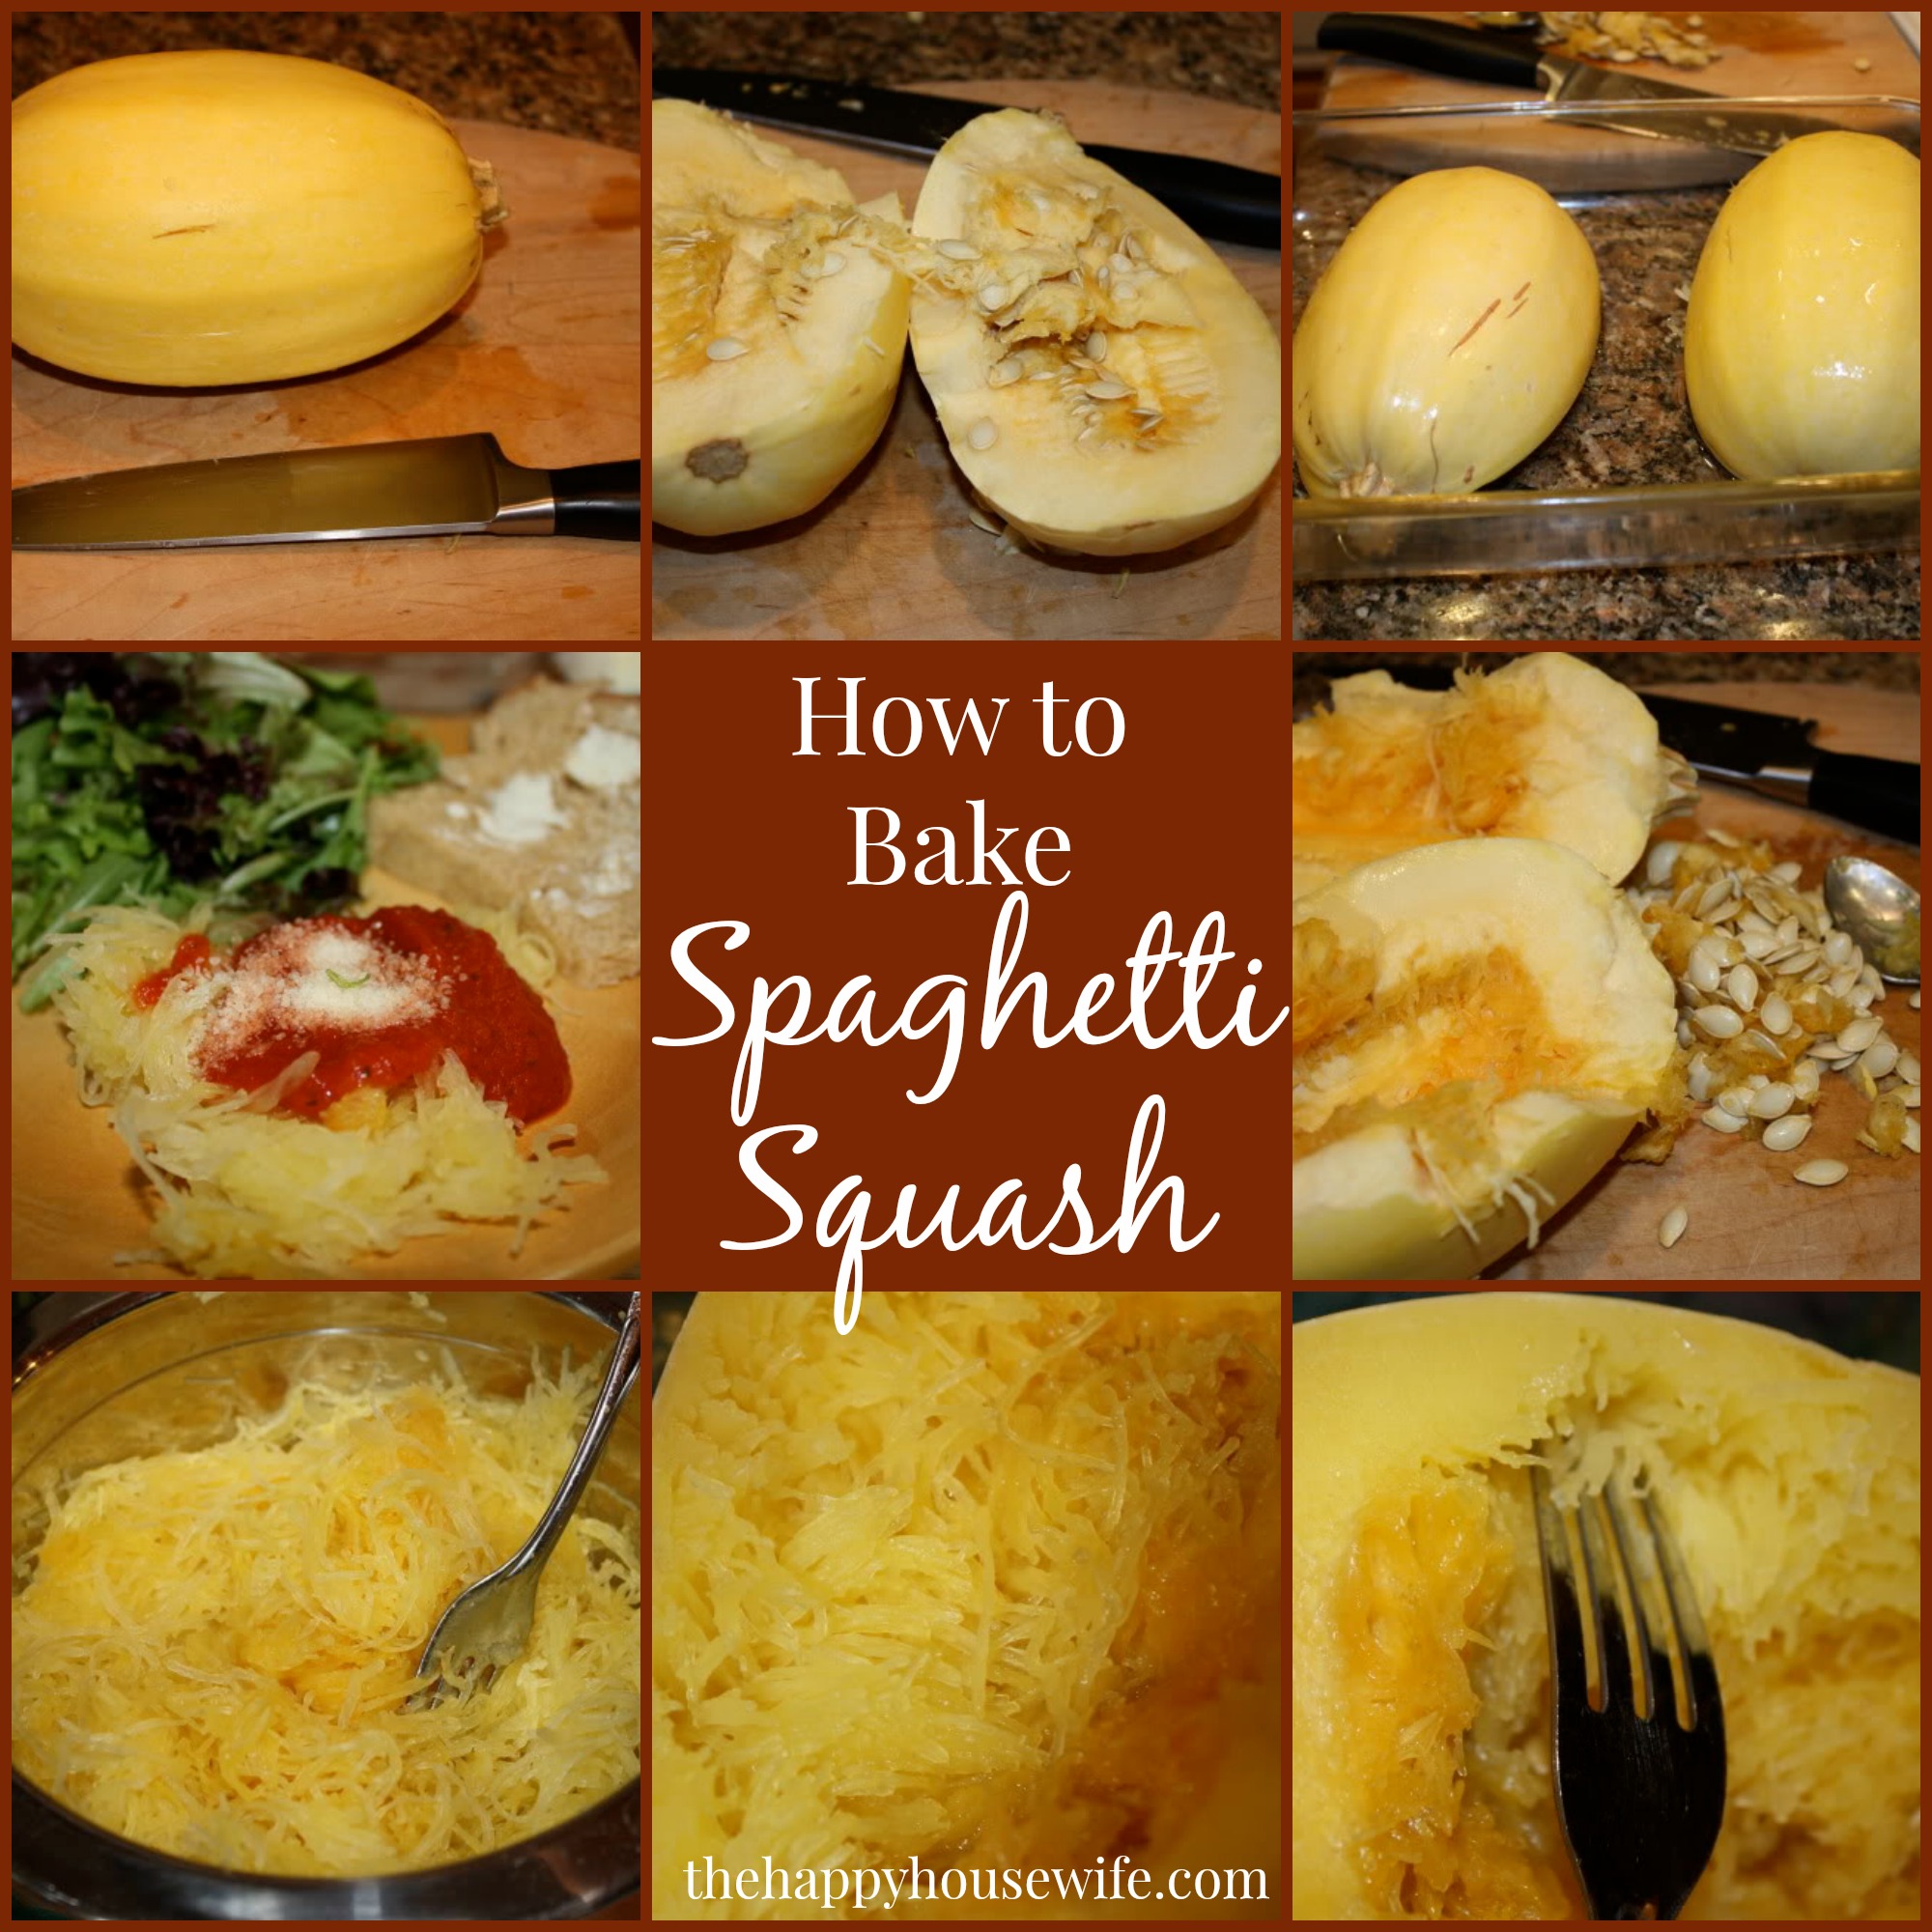 Spaghetti Squash: Cooking Techniques and Photo Tutorial - The Happy ...